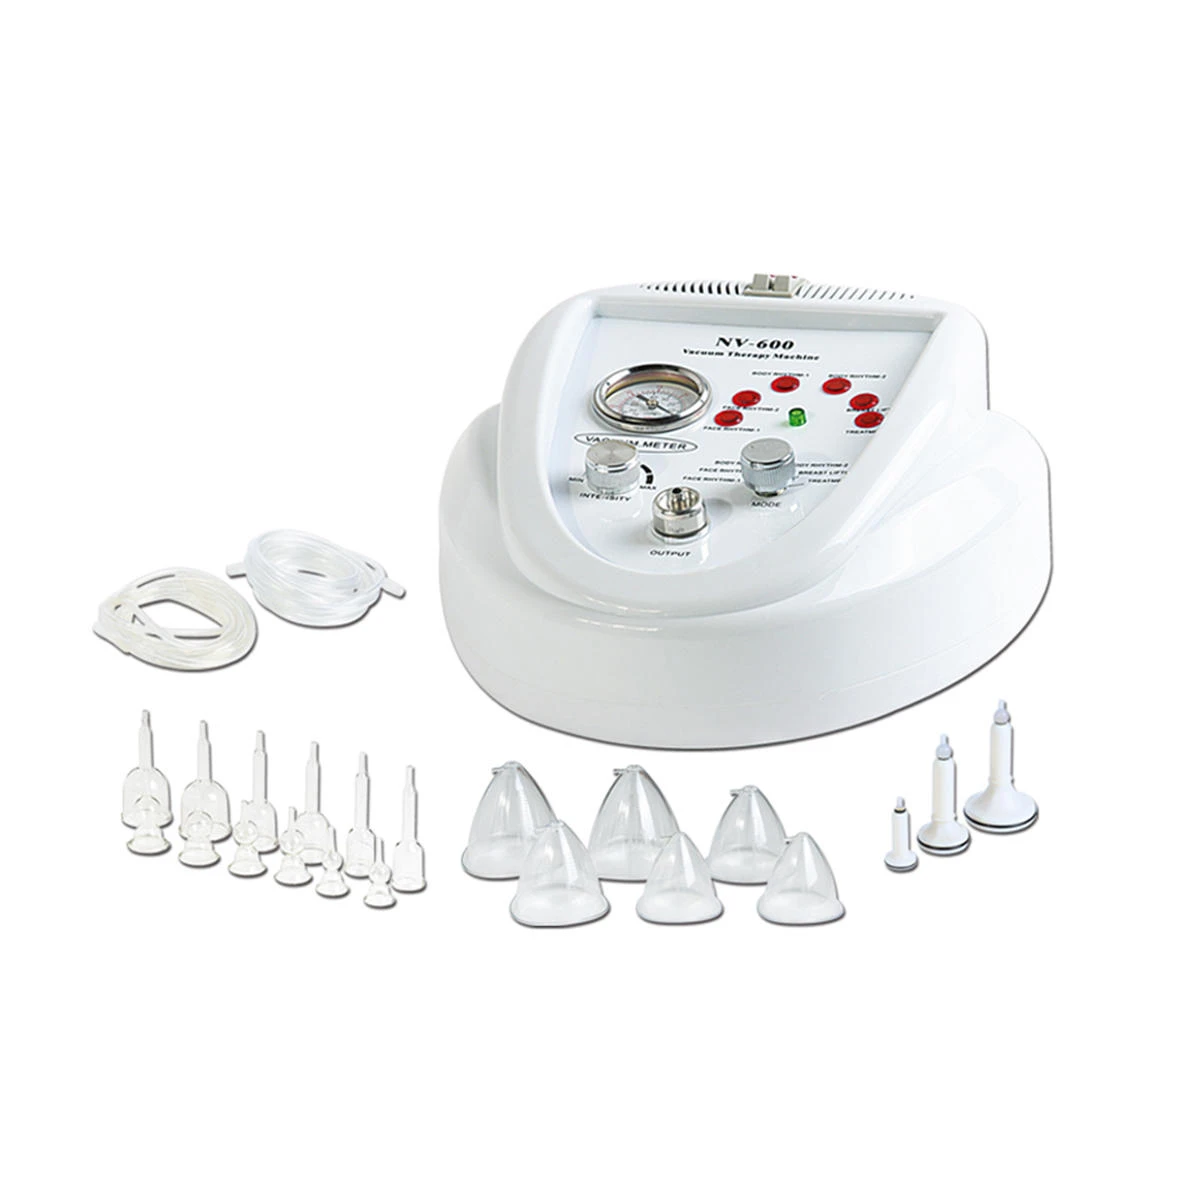 NV 600 Vacuum Massage Therapy Body Shaping Breast Enhancement Massager